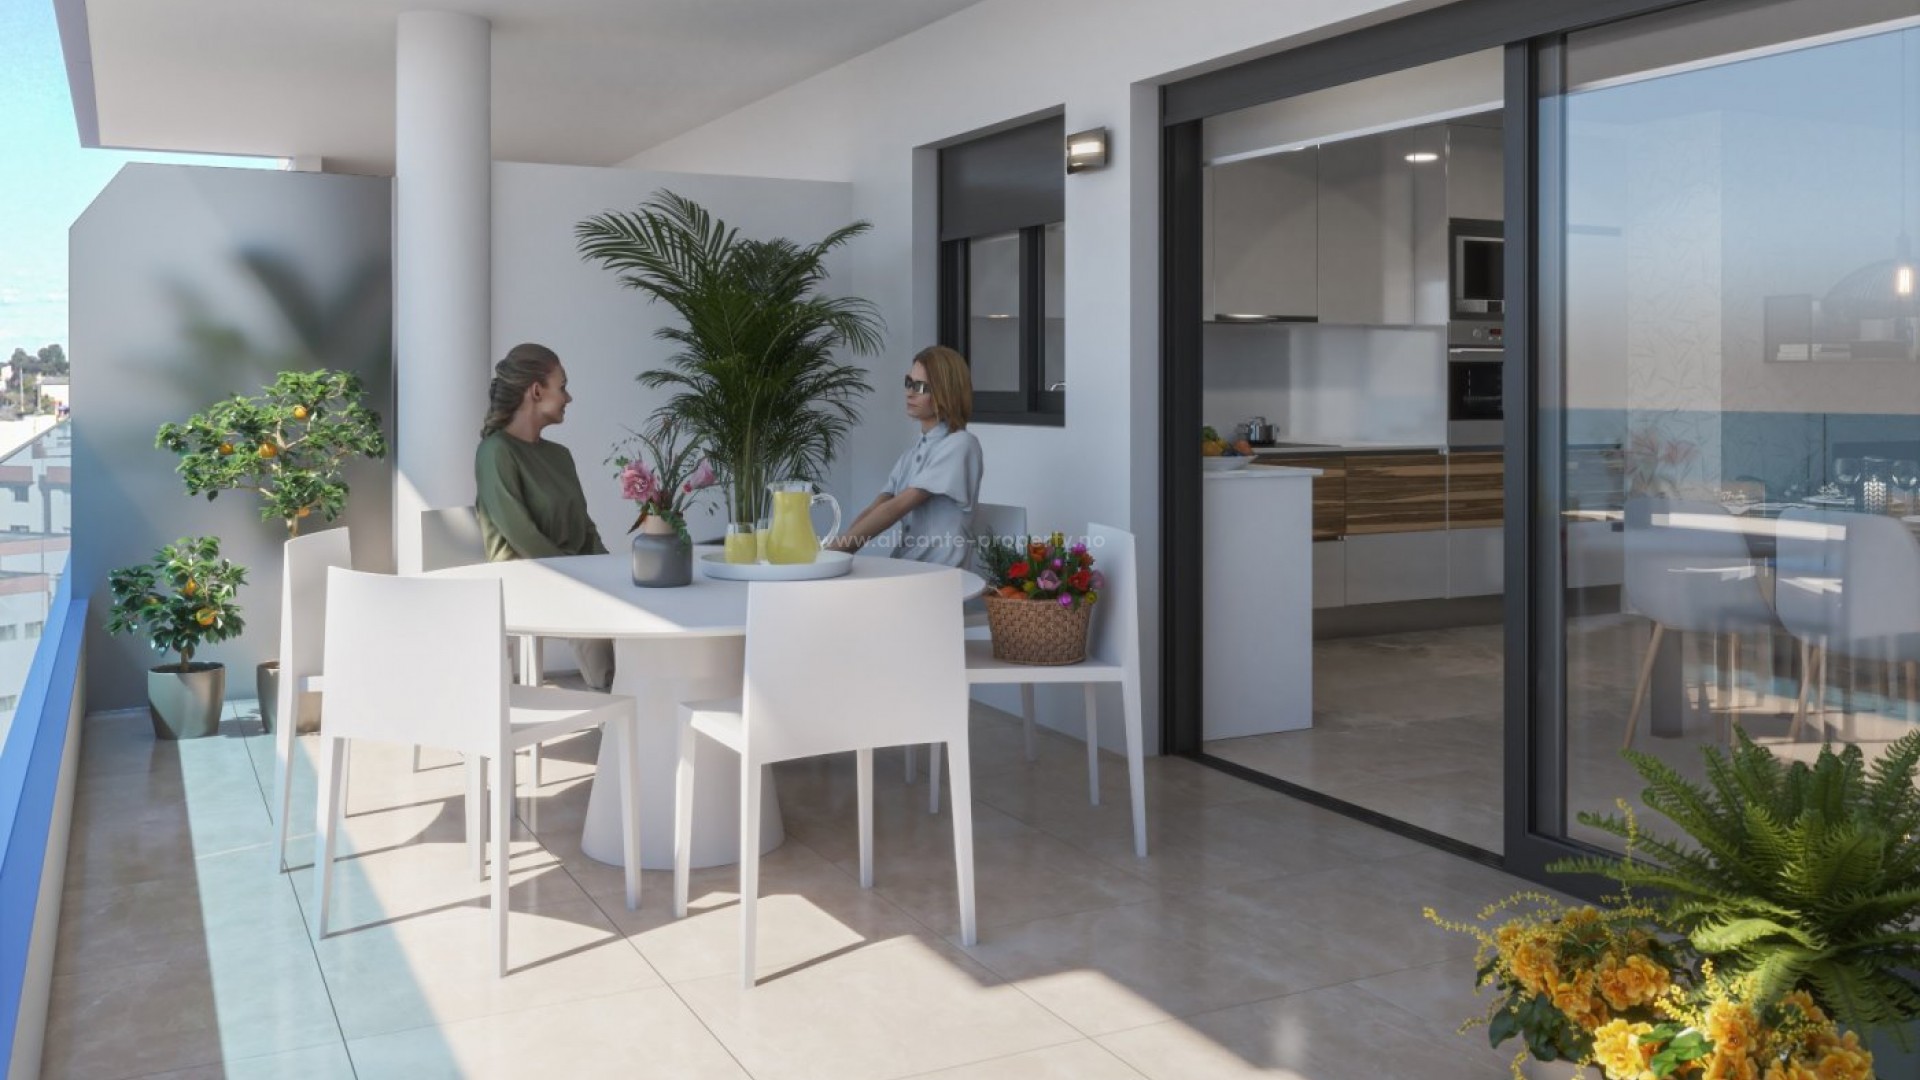 New apartments in Guardamar del Segura, 550 from the beach, 3 bedrooms, 2 bathrooms, private garden w/pool, spa, gym and a shared solarium with hot tub